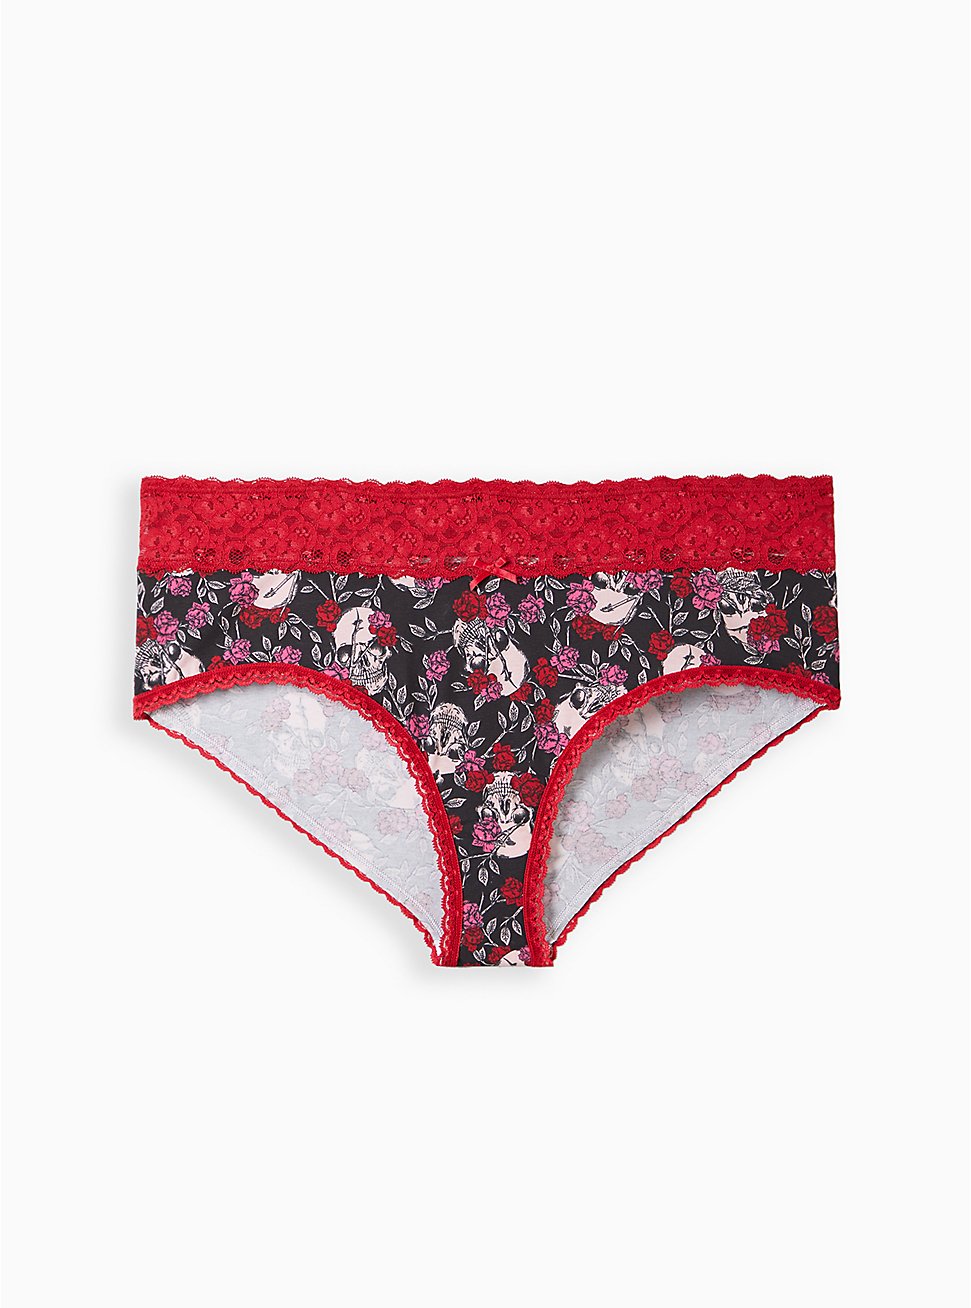 Plus Size Wide Lace Cheeky Panty - Cotton Skull Black, ROSE BUD SKULLS, hi-res